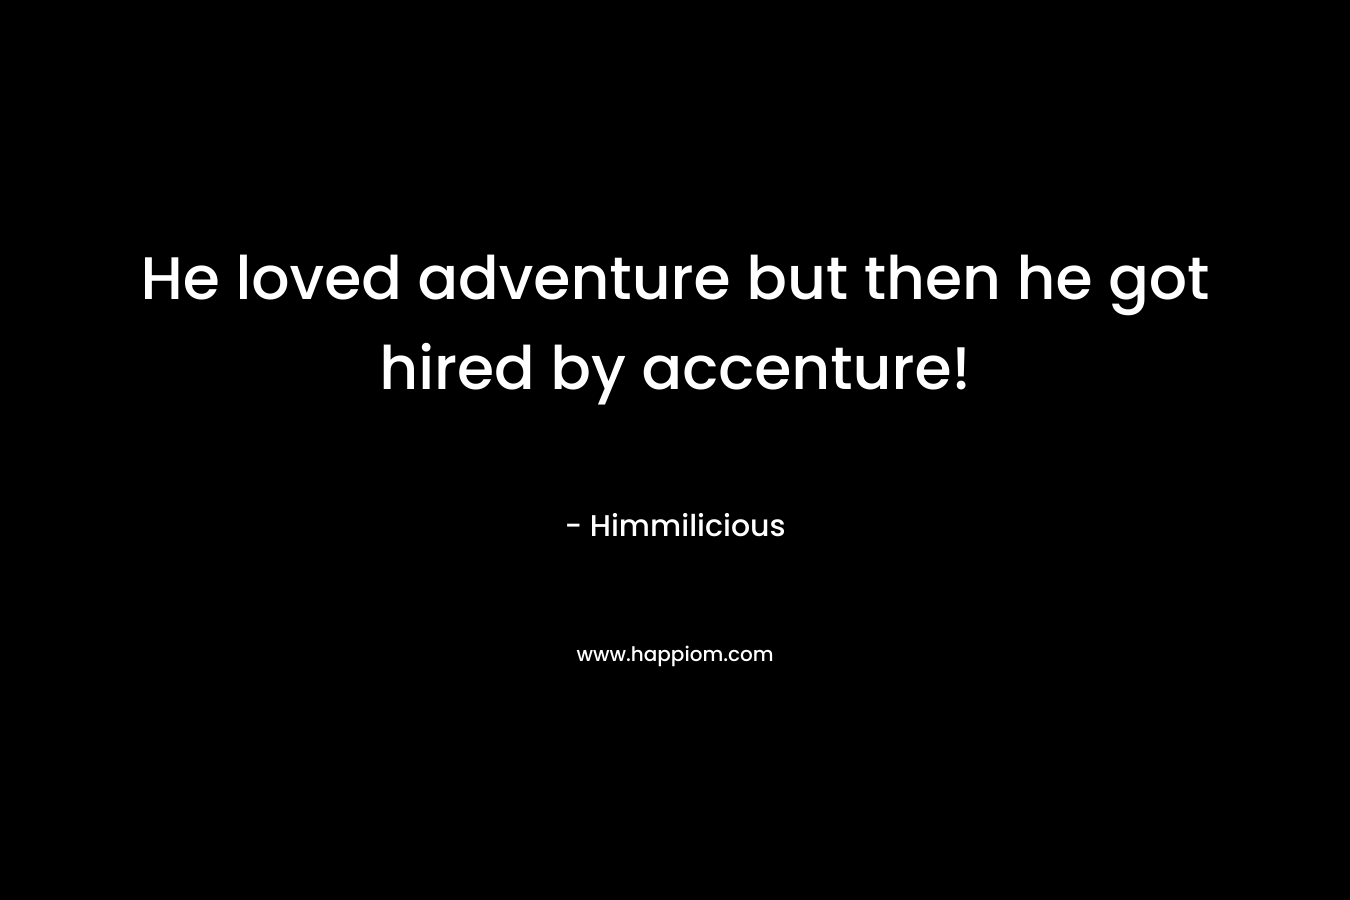 He loved adventure but then he got hired by accenture!